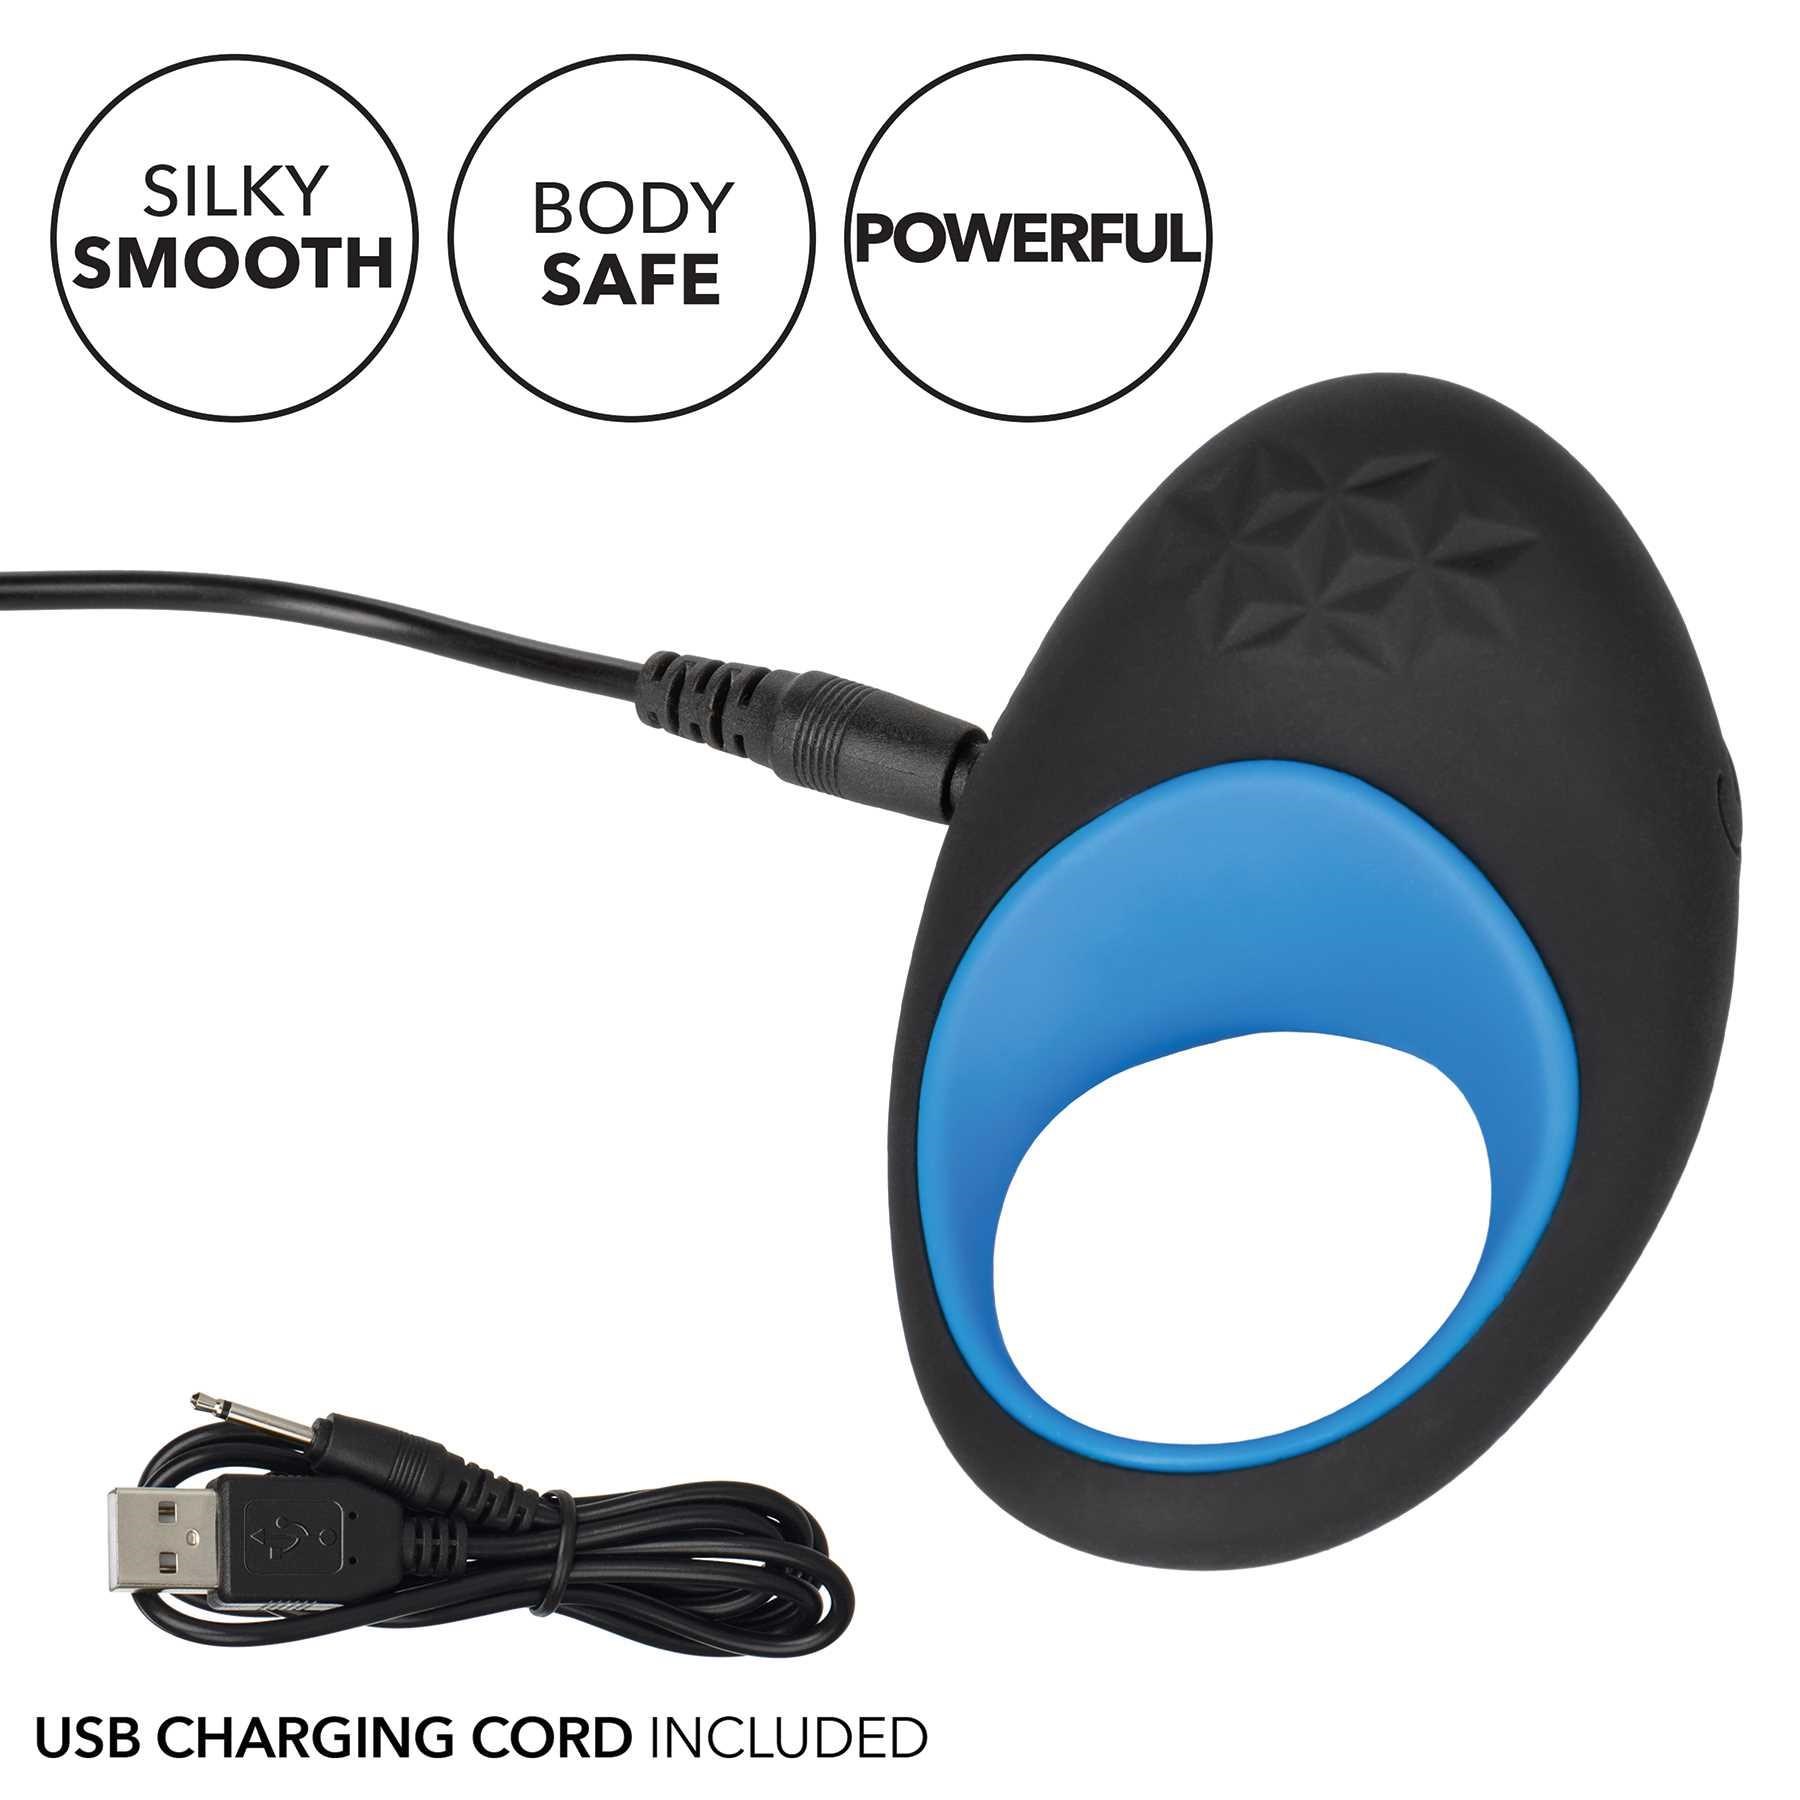 product with USB cord